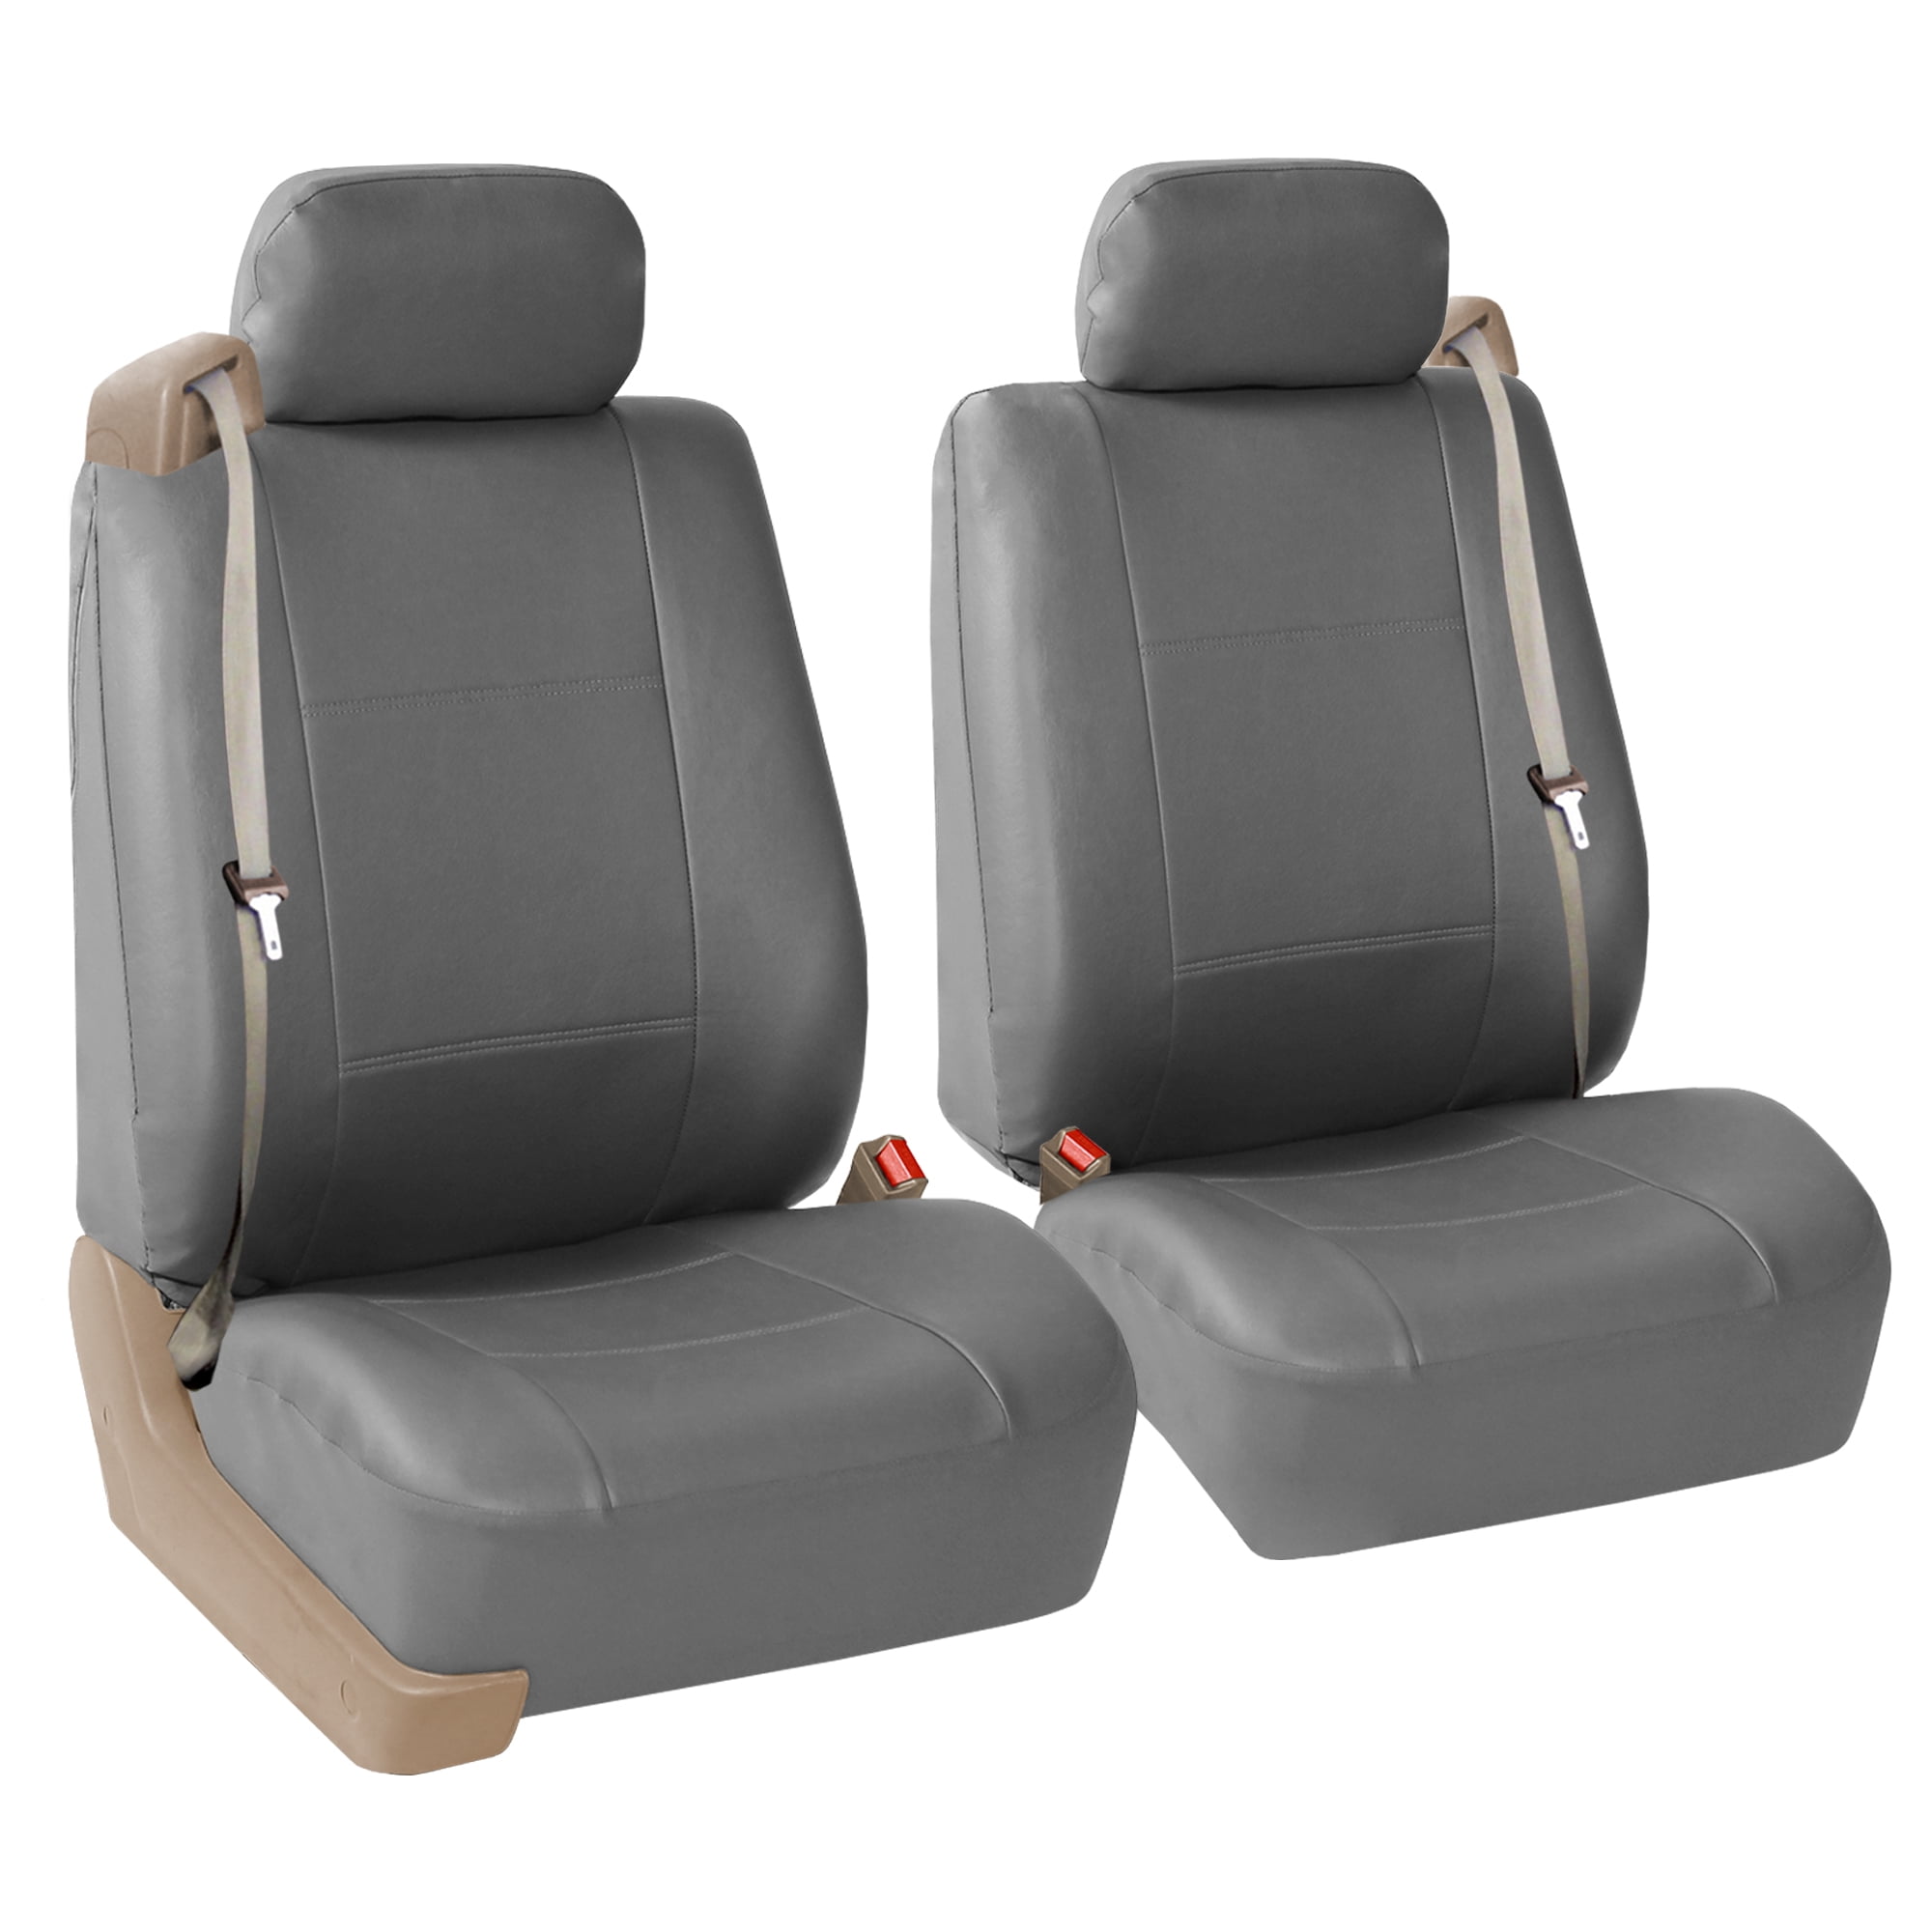 Must-Have Car Accessories: Family Safety & Comfort on Road – Seat